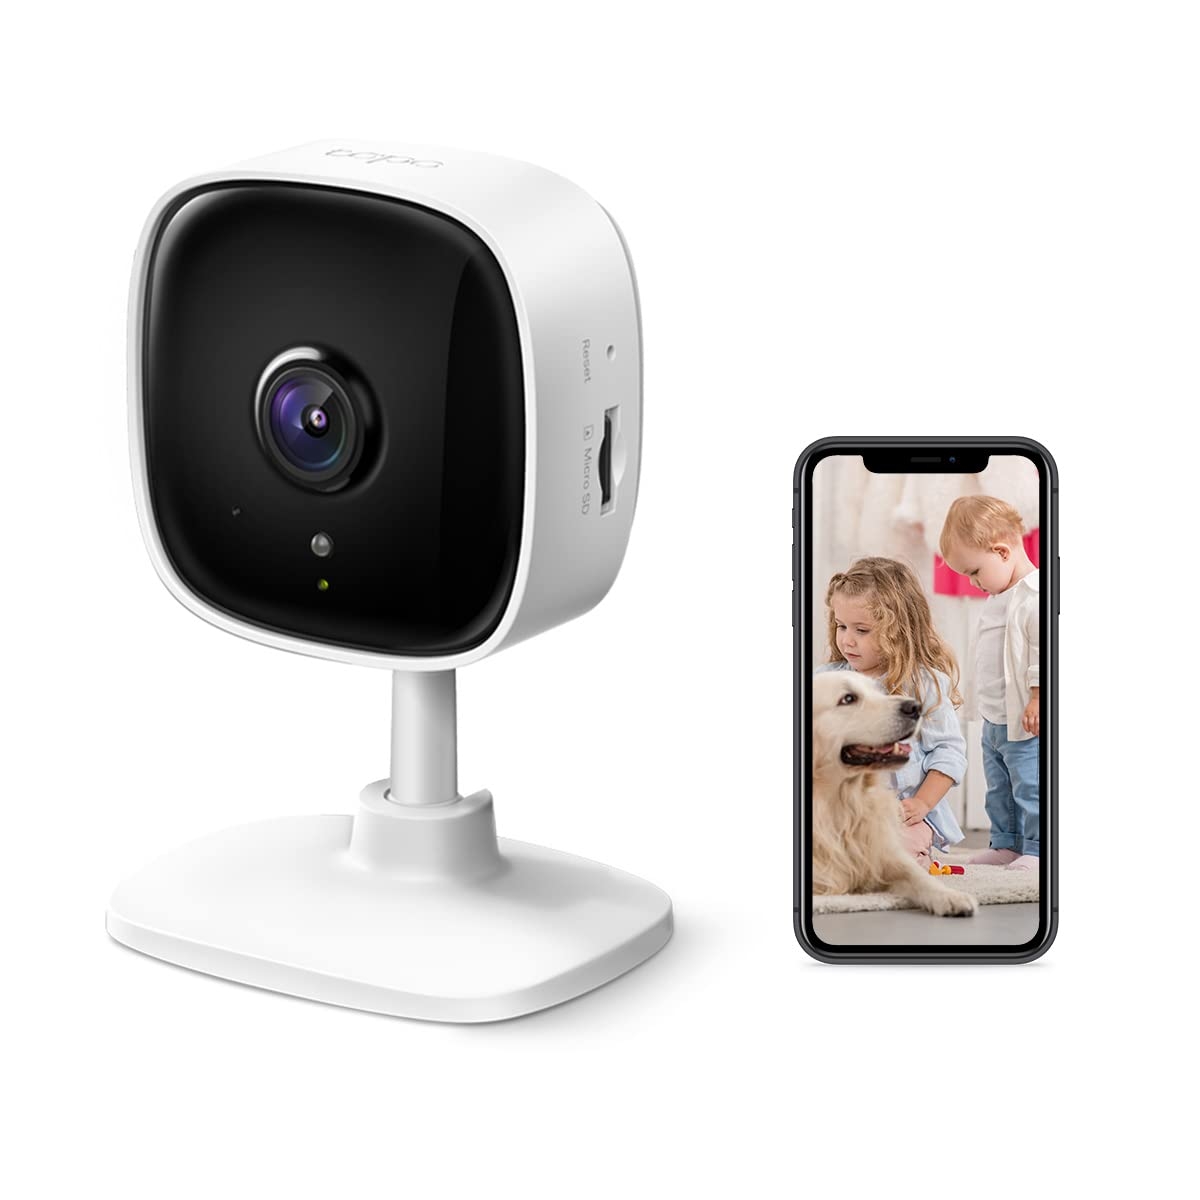 TP-Link 3MP Smart Wi-Fi Security Camera (Tapo C110) | 2-Way Audio | UHD Night Vision | Motion Detection | Indoor CCTV